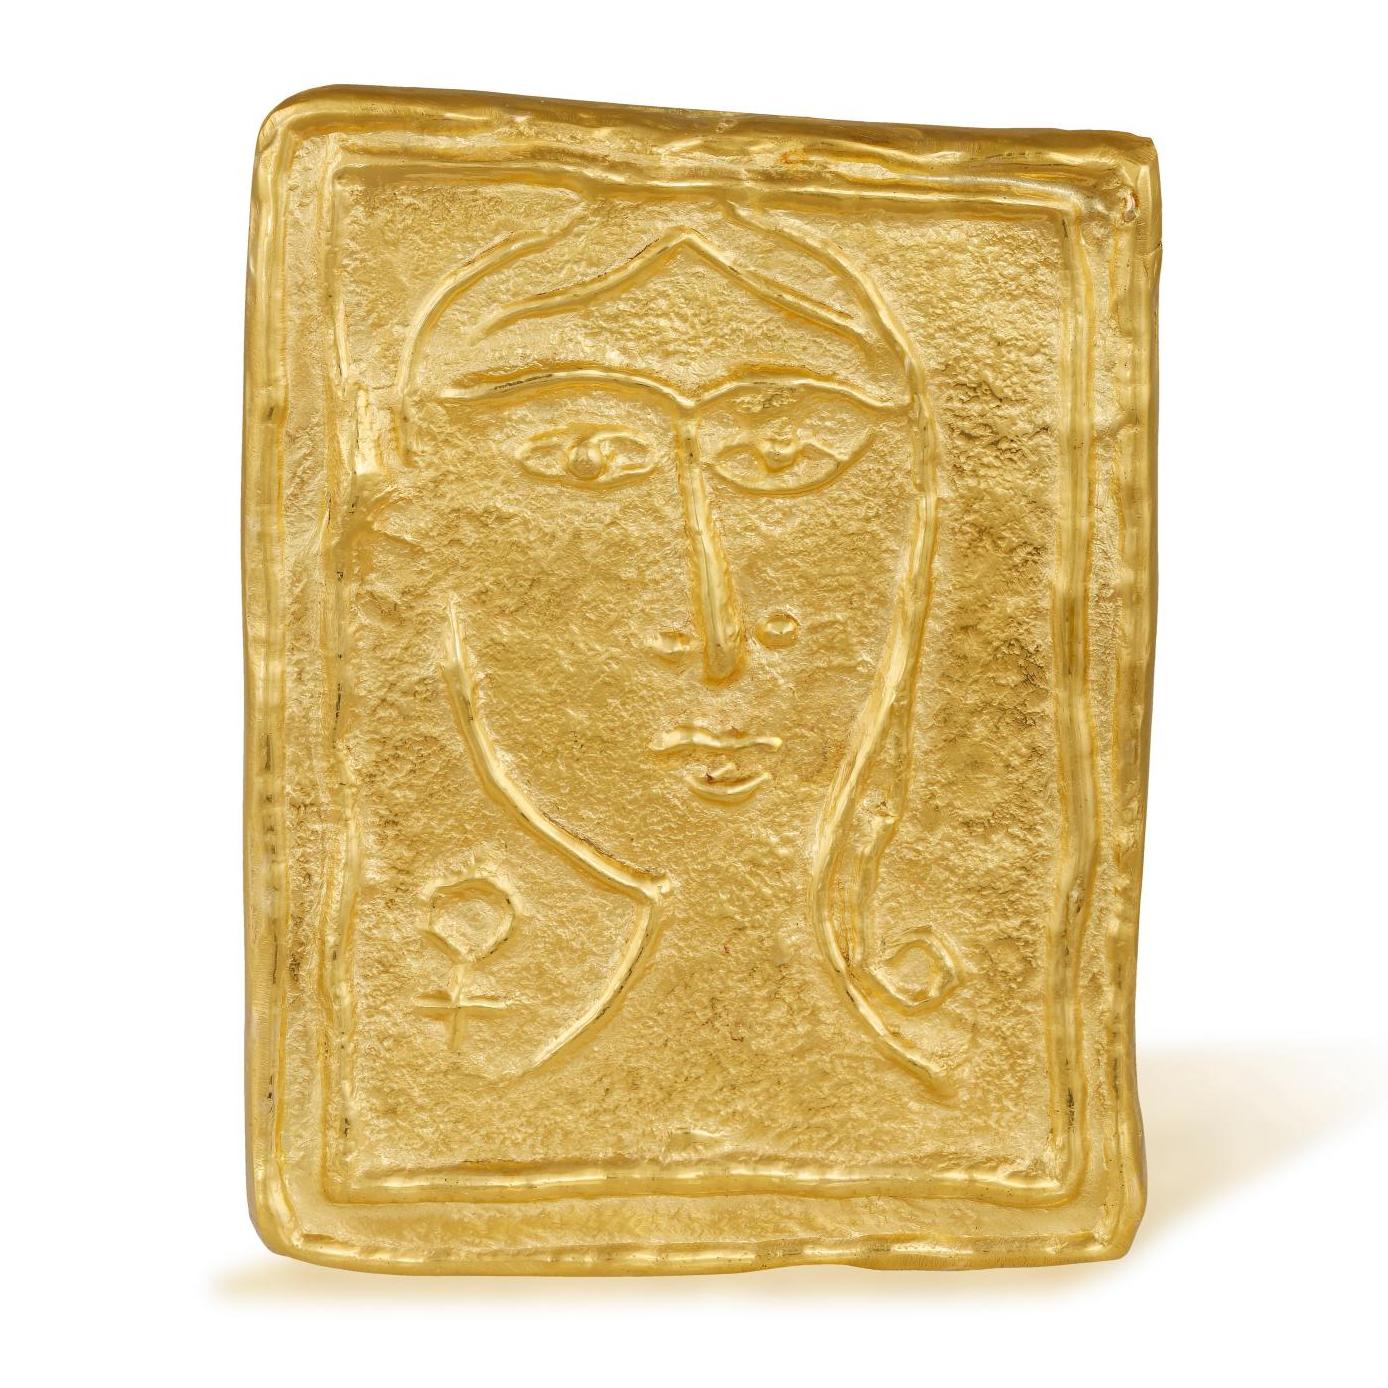 Pre-sale - The Art of Jewelry According to André Derain